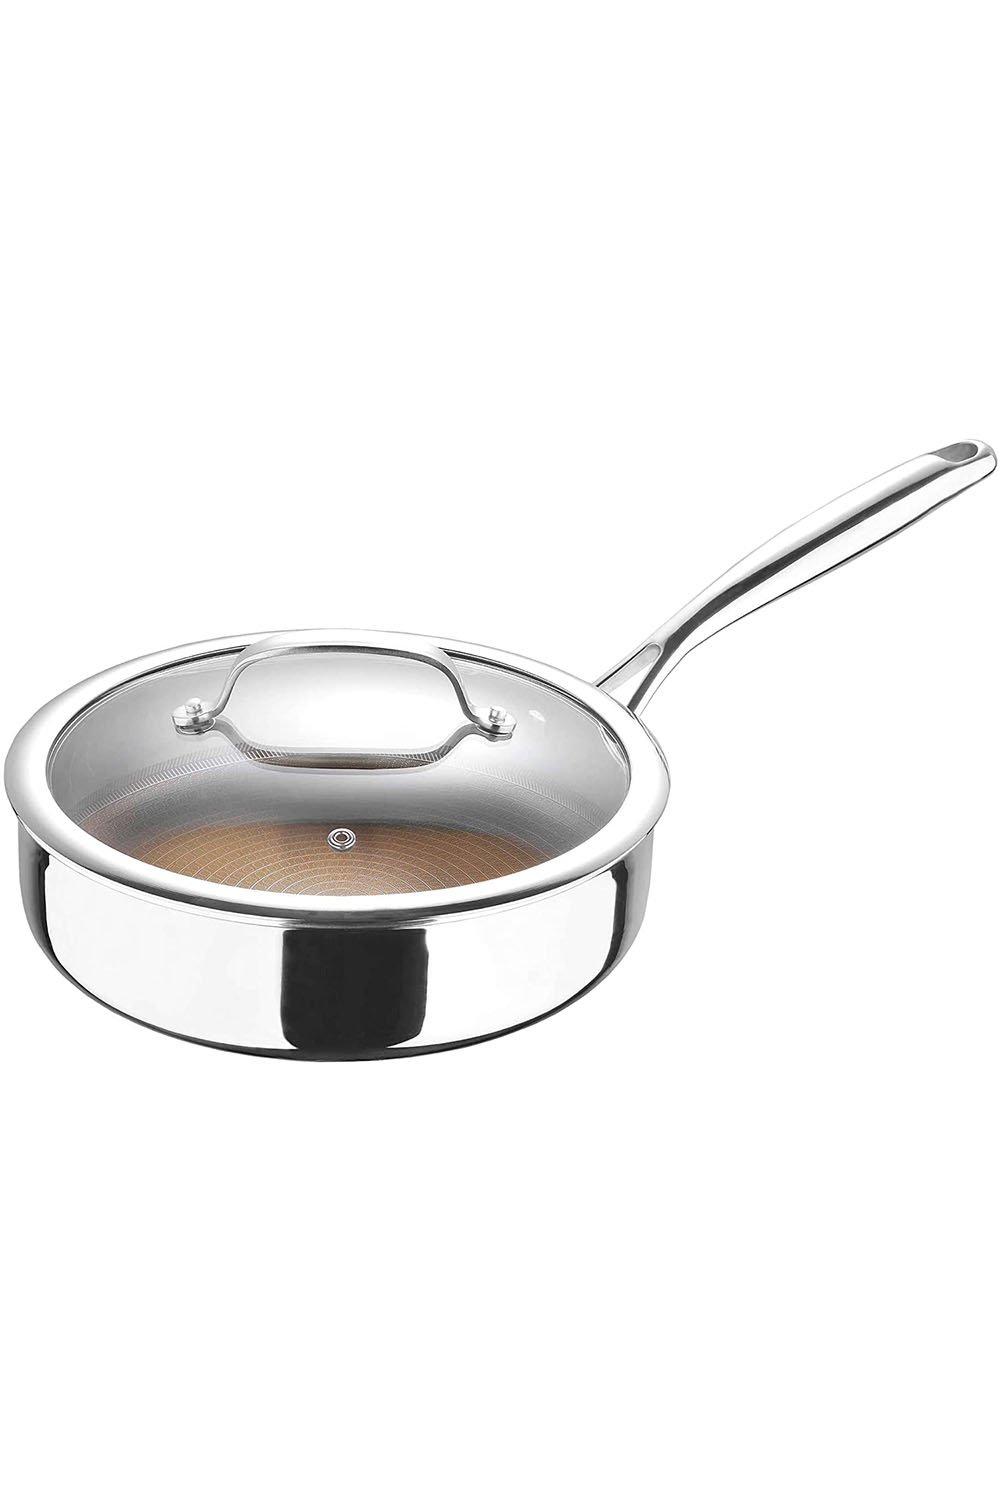 giro aluminium & stainless steel sauté pan non-stick with glass lid 2.8l silver